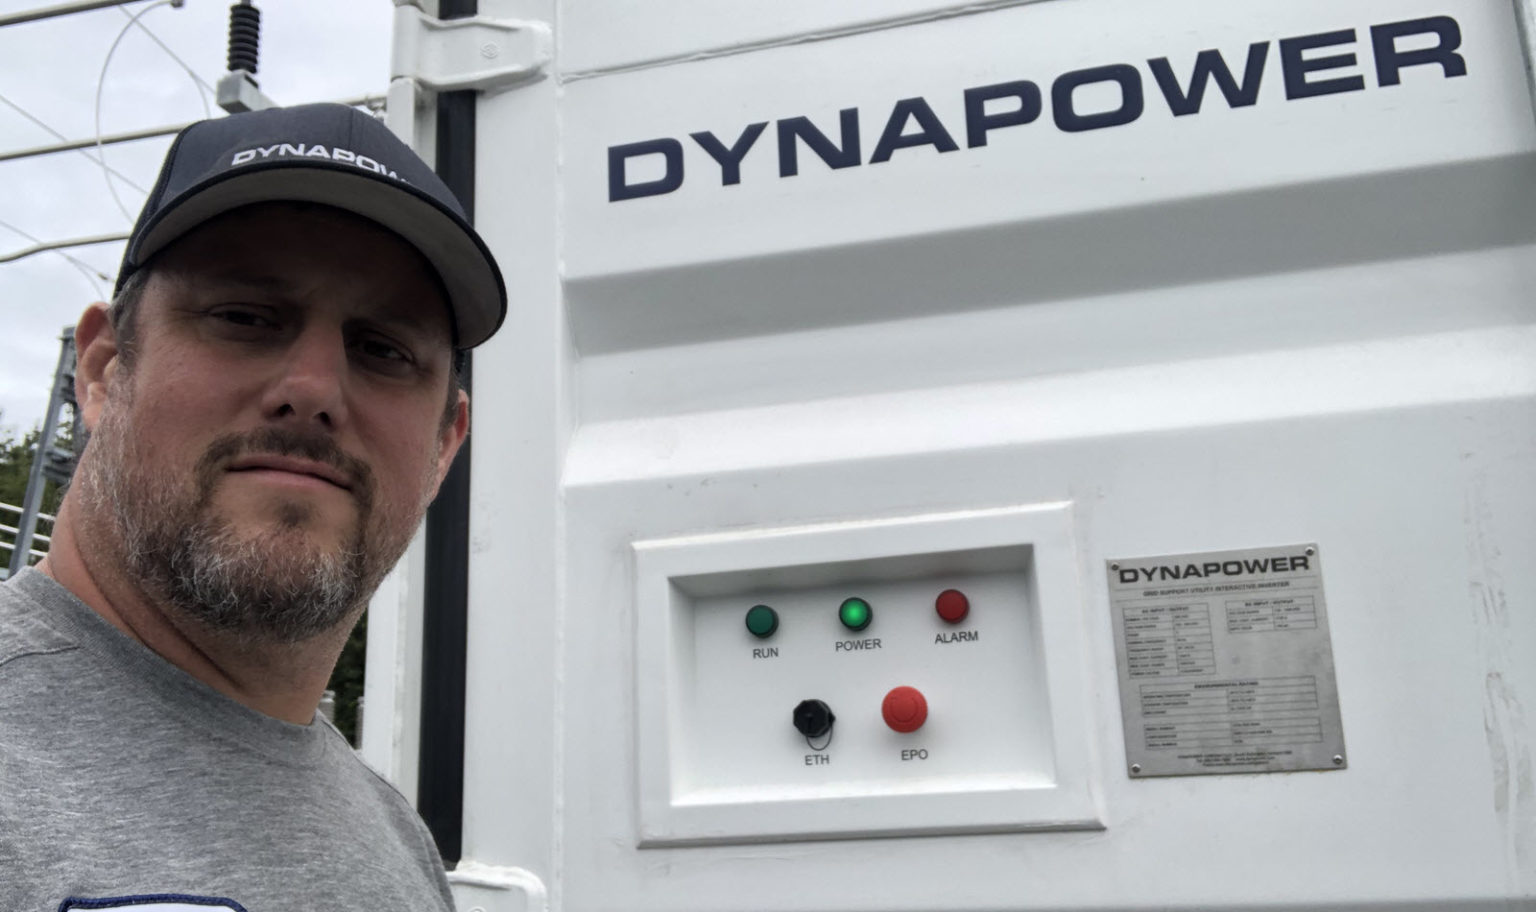 Patrick Carroll in Dynapower branded hat in front of Dynapower energy storage system